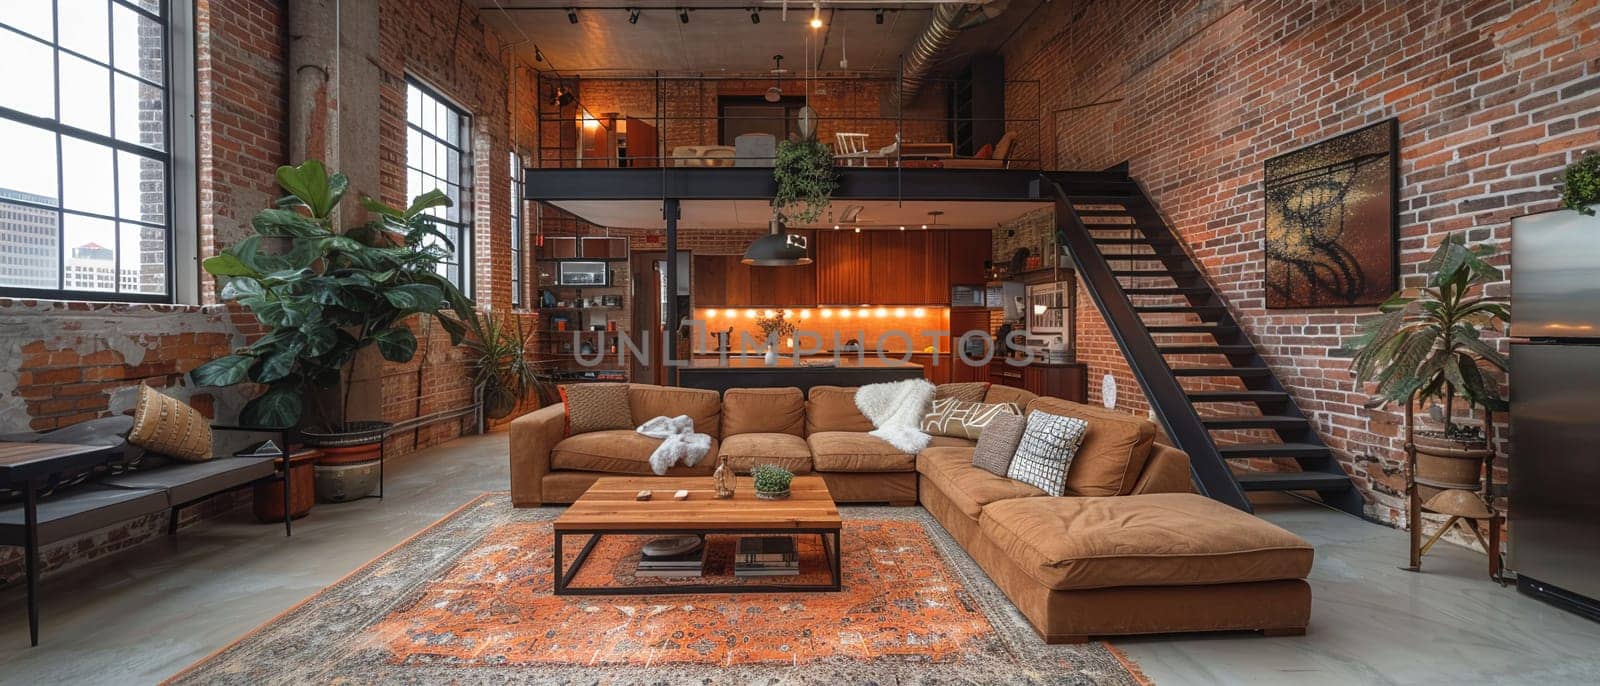 Chic Urban Loft with Exposed Brick and Industrial Features, loft living urban style.